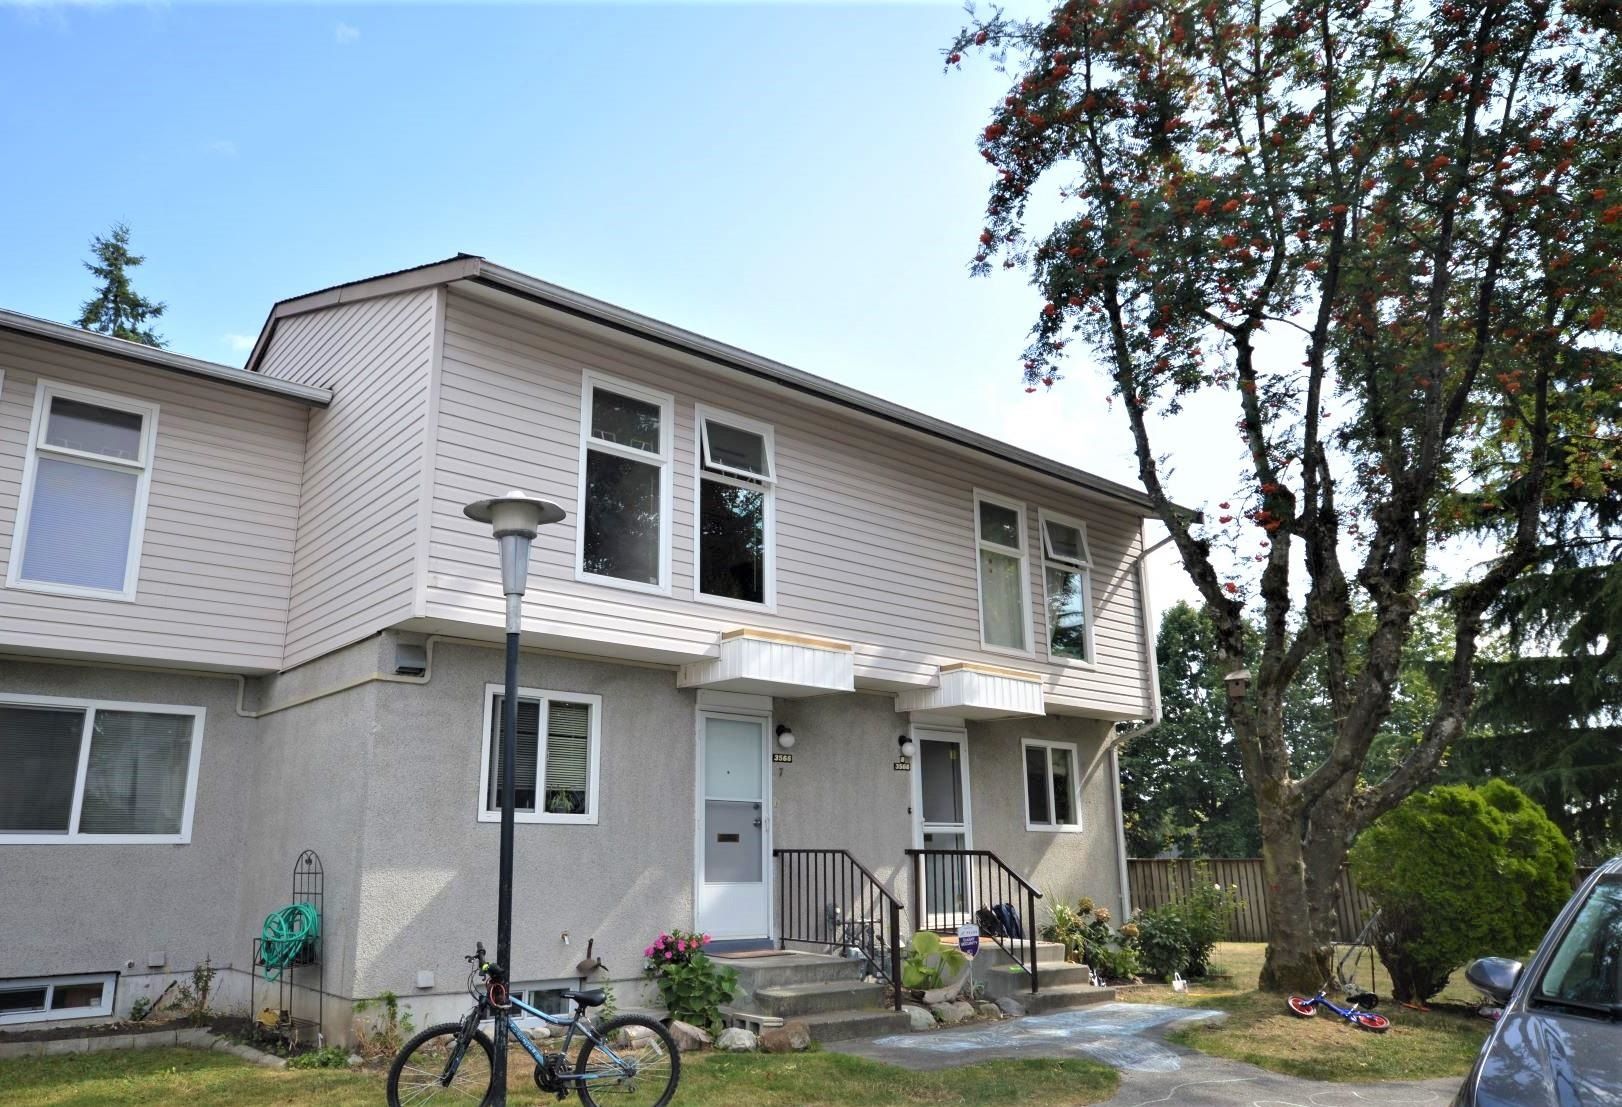 I have sold a property at 7 3566 49TH AVE E in Vancouver
